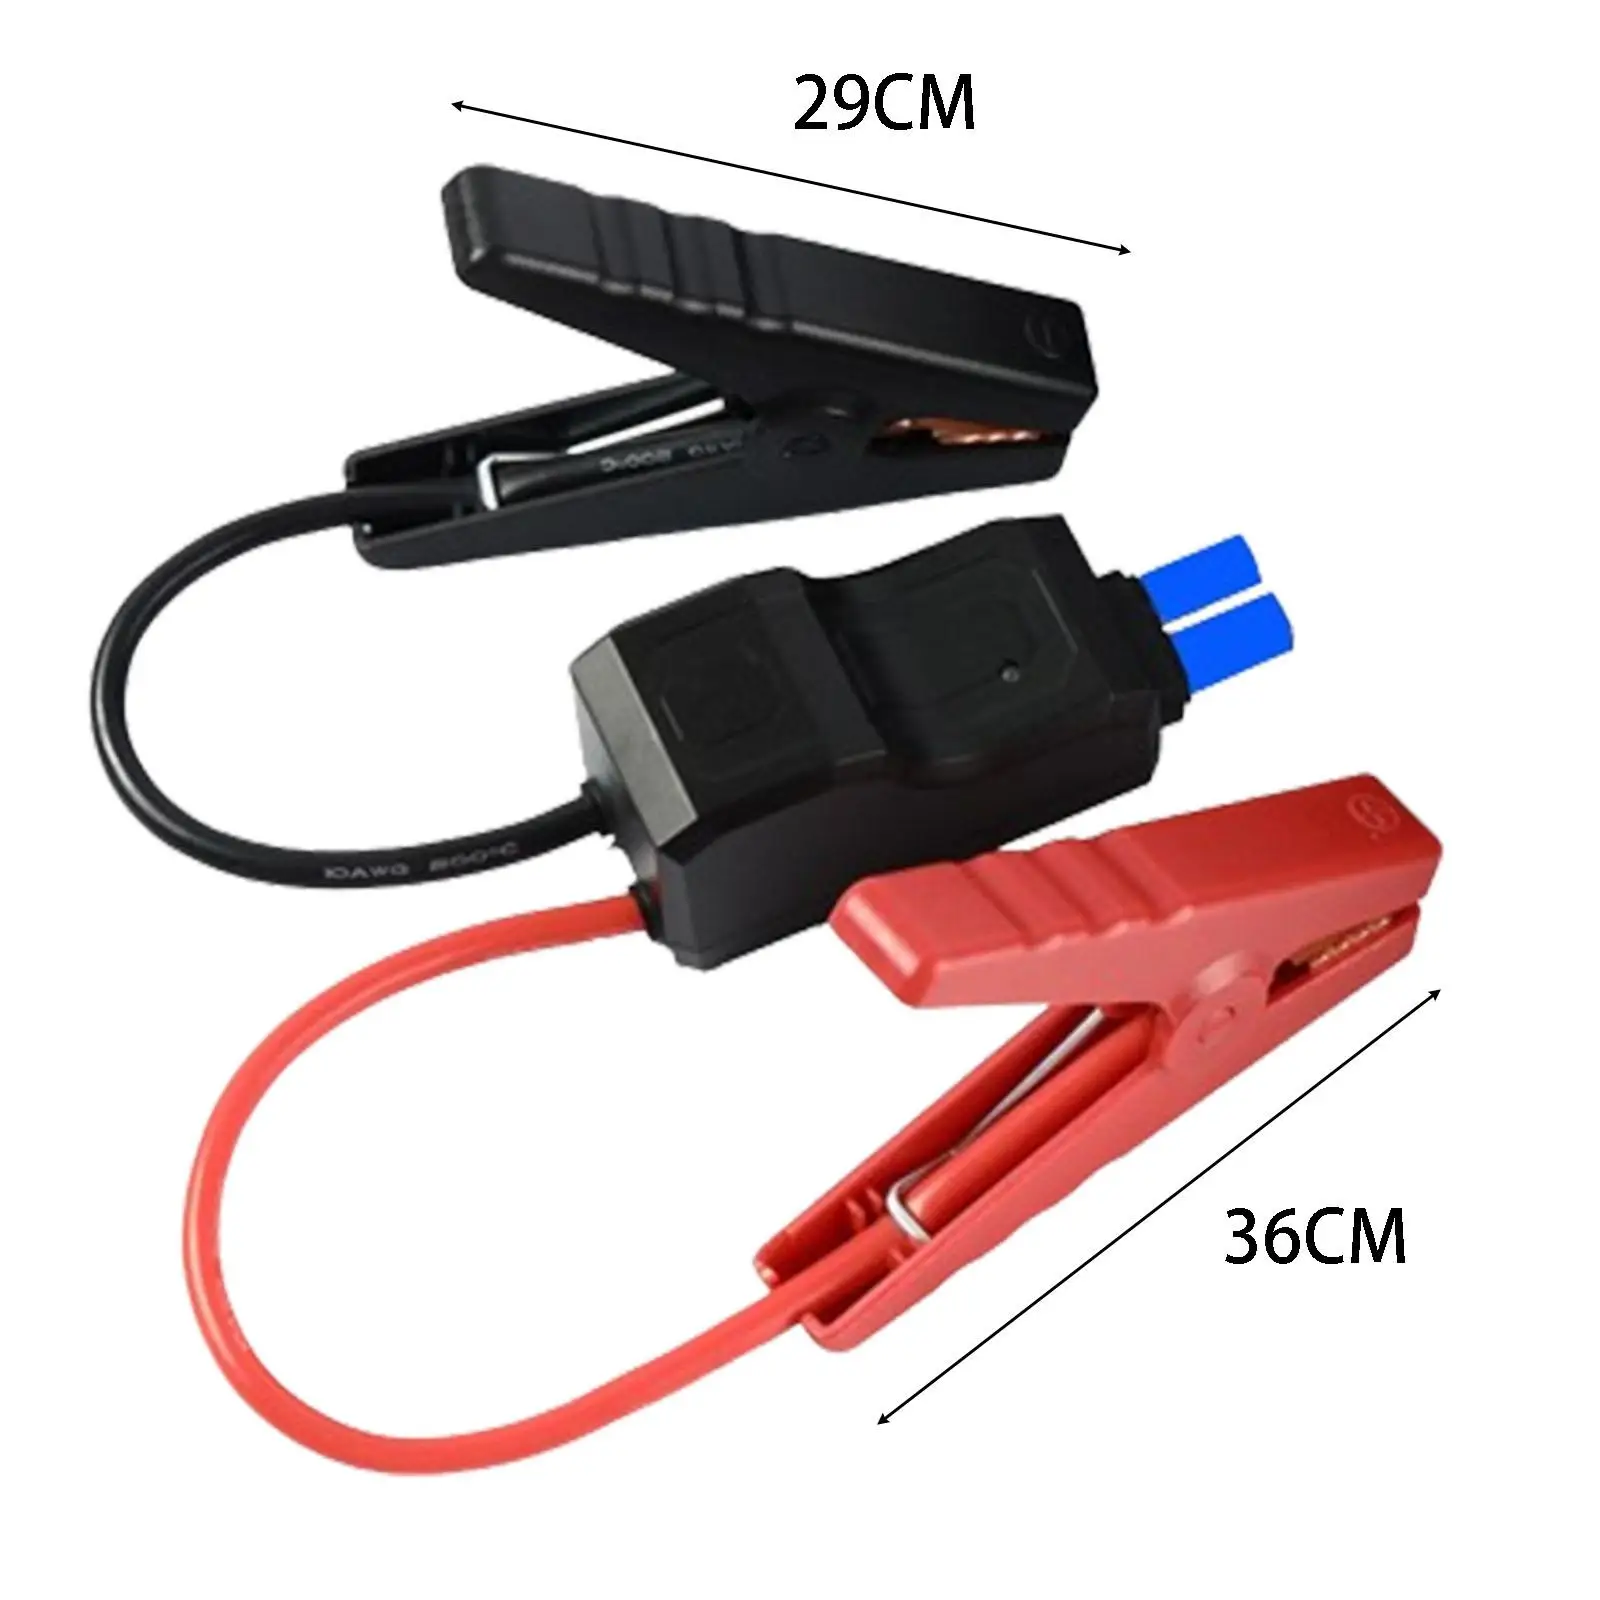 Generic Jump Starter Cable Clamp Easy to Use Portable Alligator Clip Booster